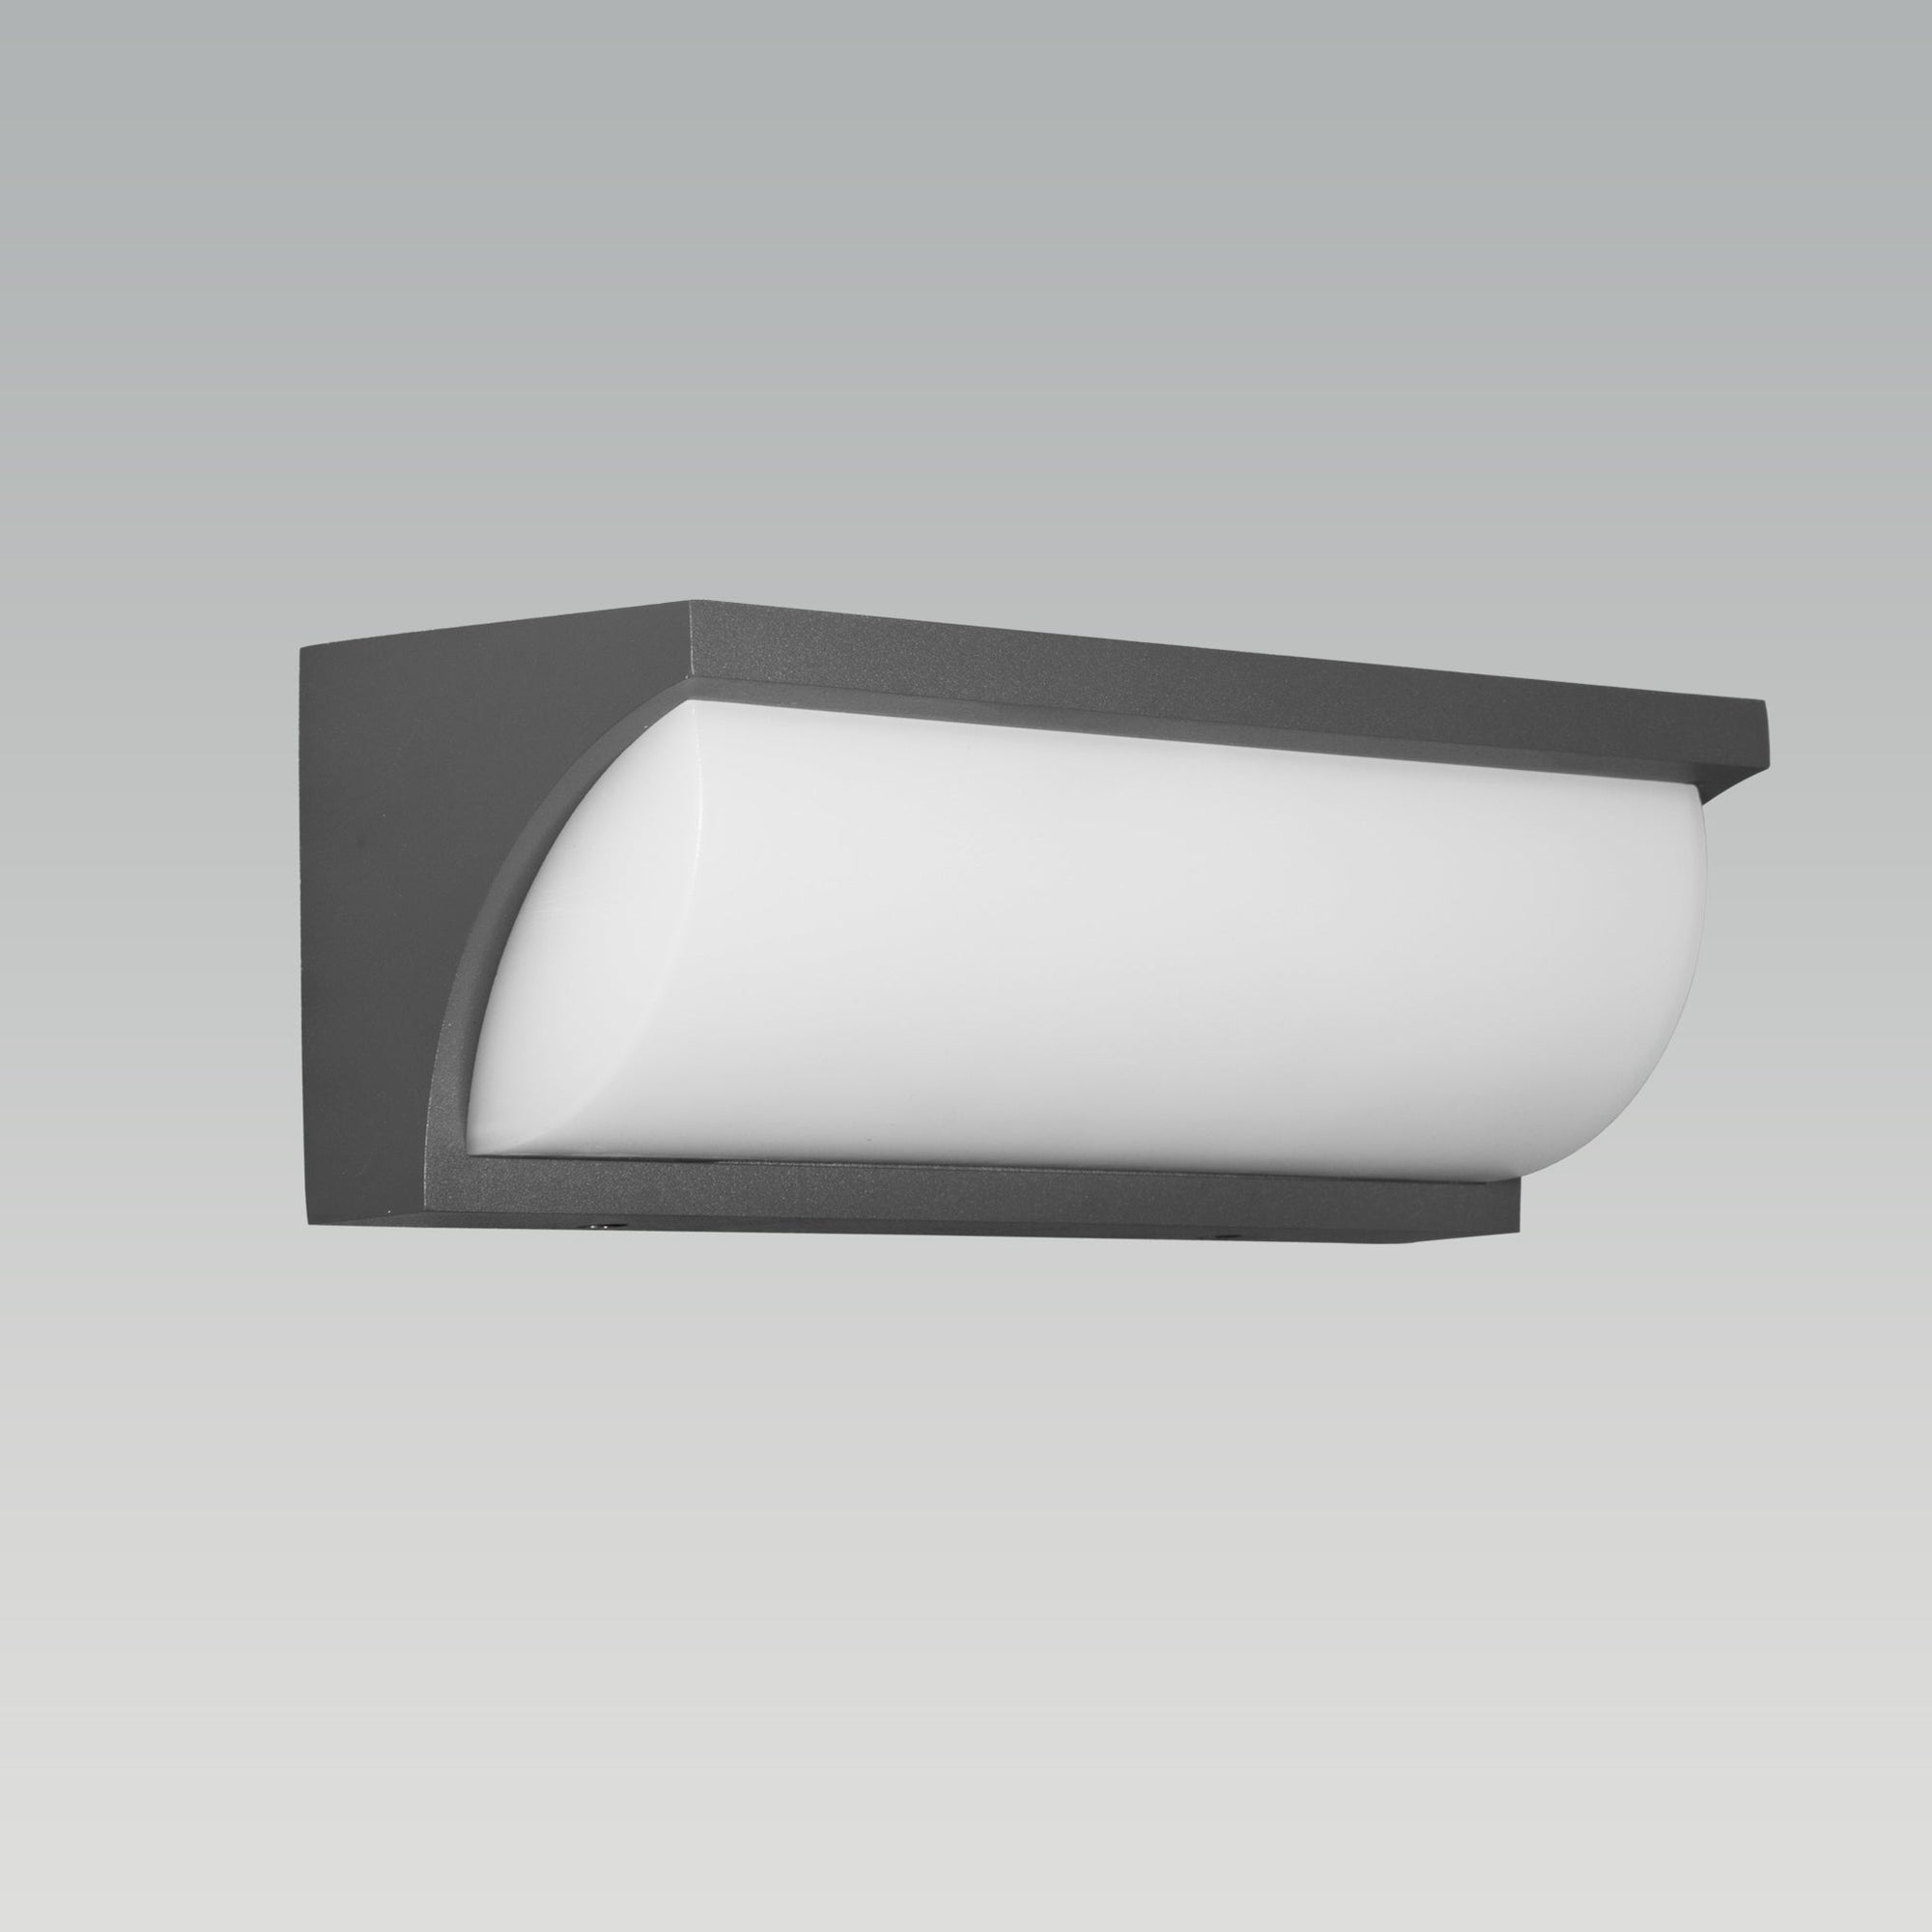 Shop Forward Looking LED Outdoor Wall Light online